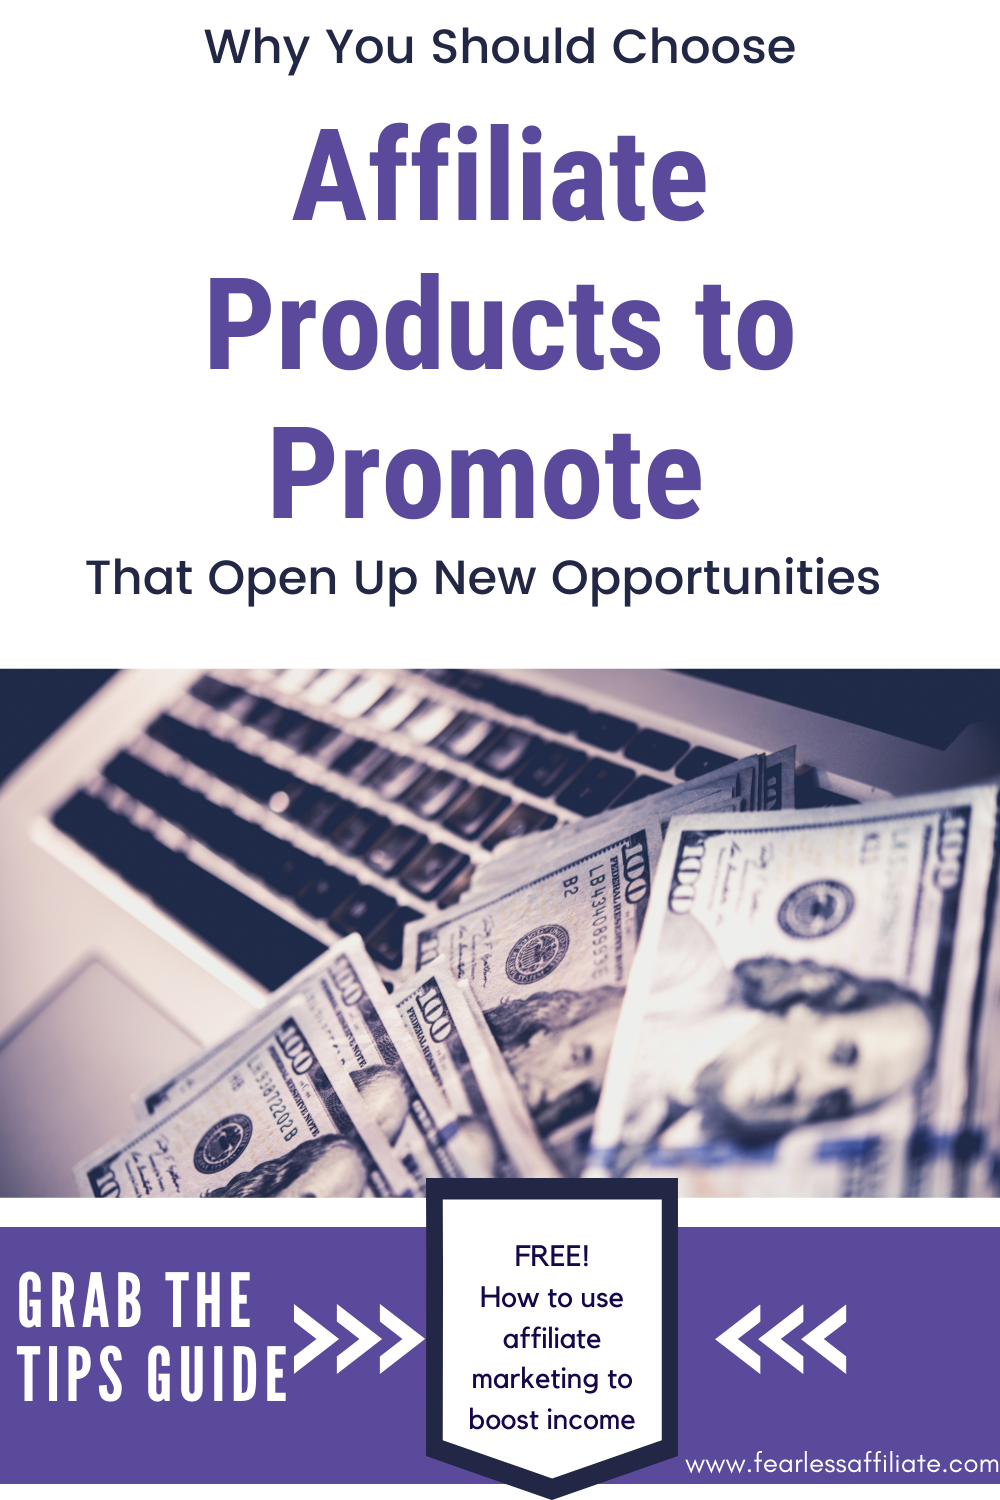 Choosing Helpful Affiliate Products to Promote